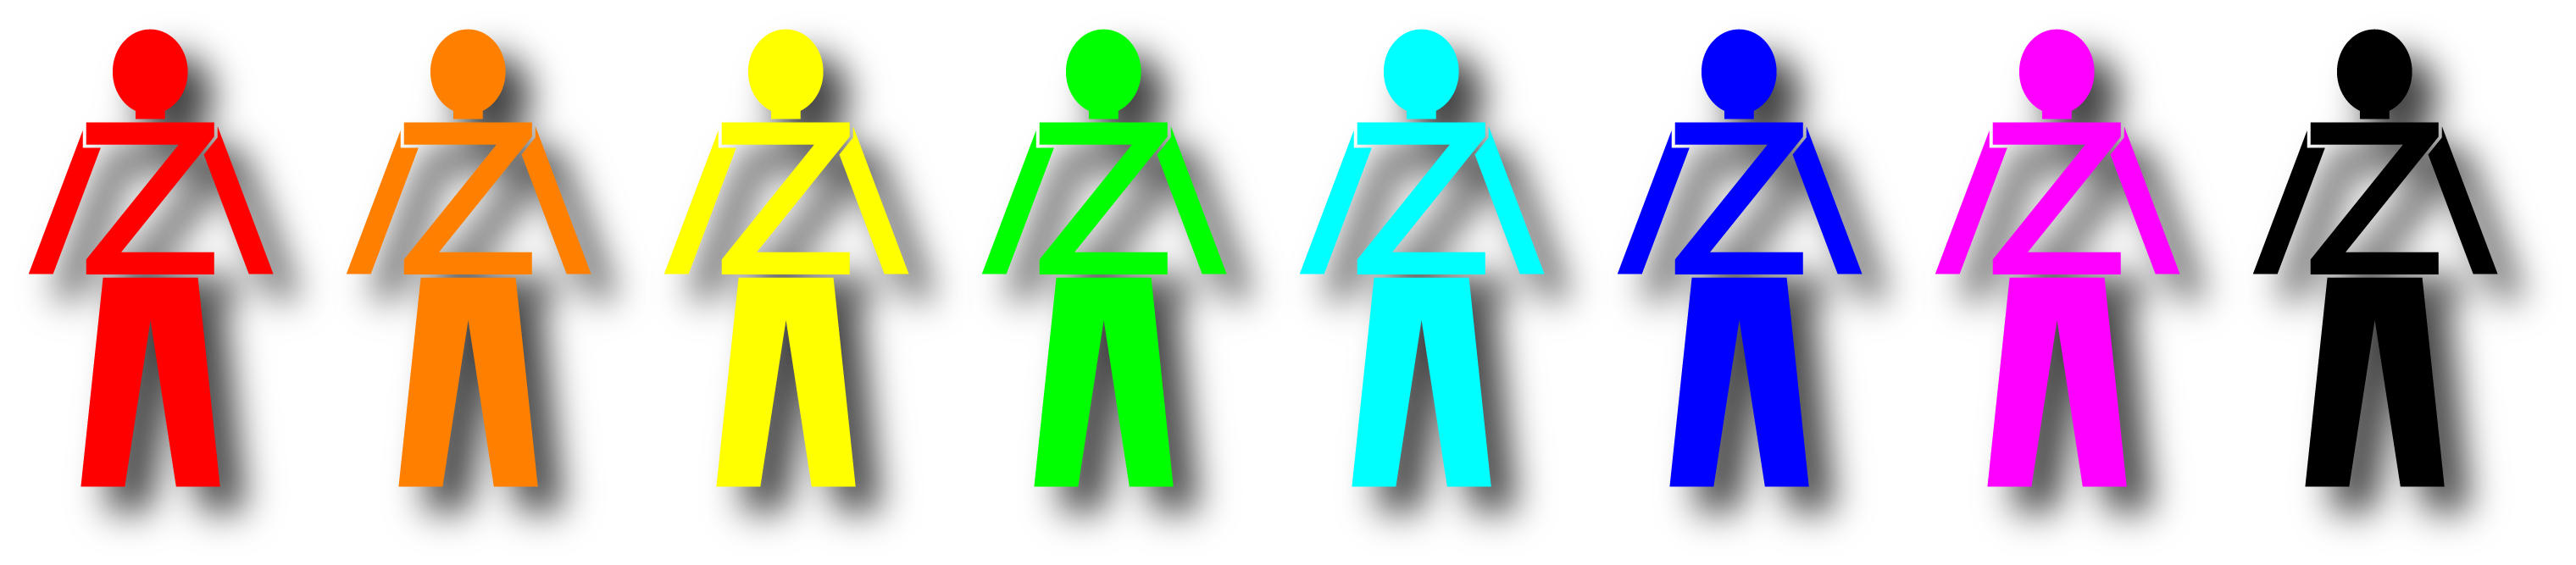 illustration of employees in different colors each with a Z across their chests to indicate GenZ